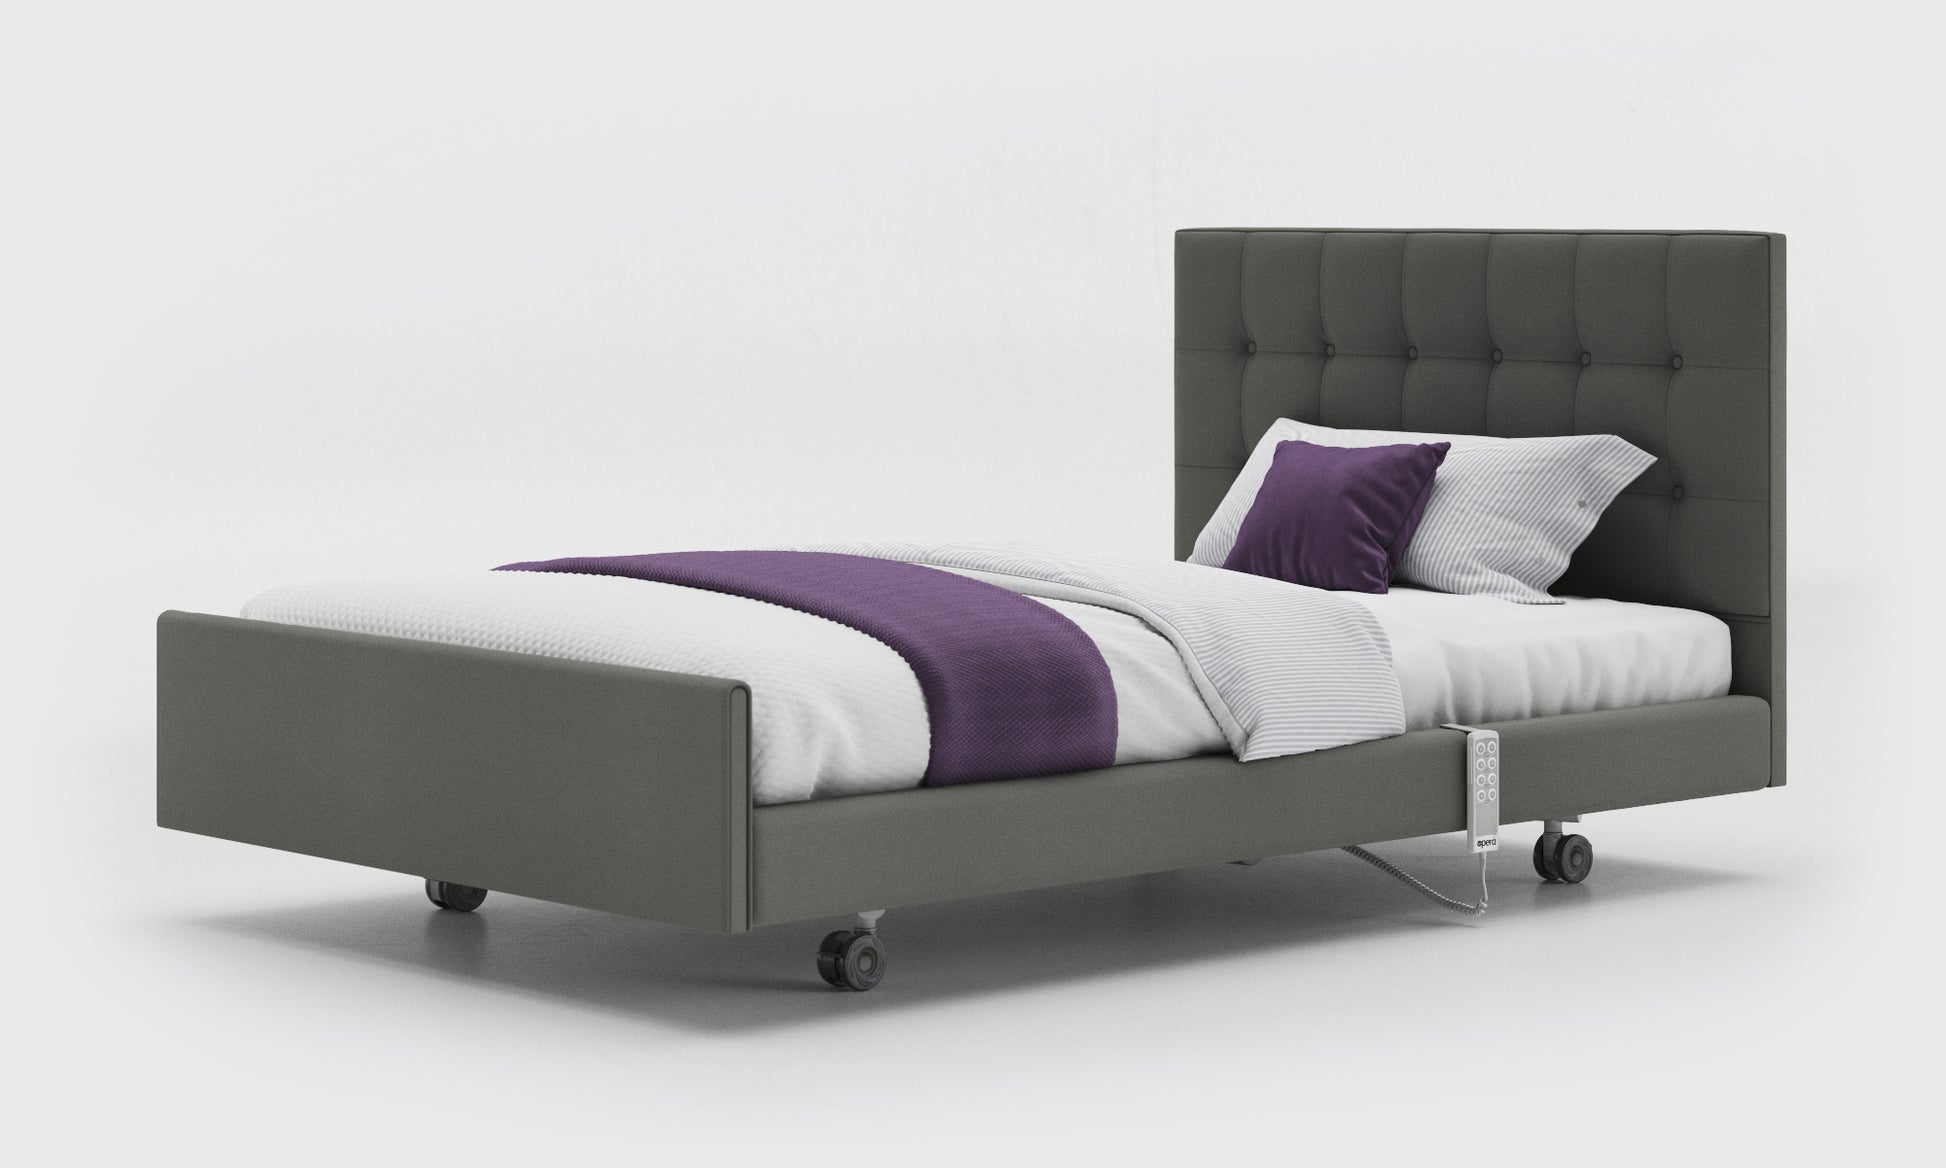 signature comfort bed 4ft with an emerald headboard in lichtgrau leather